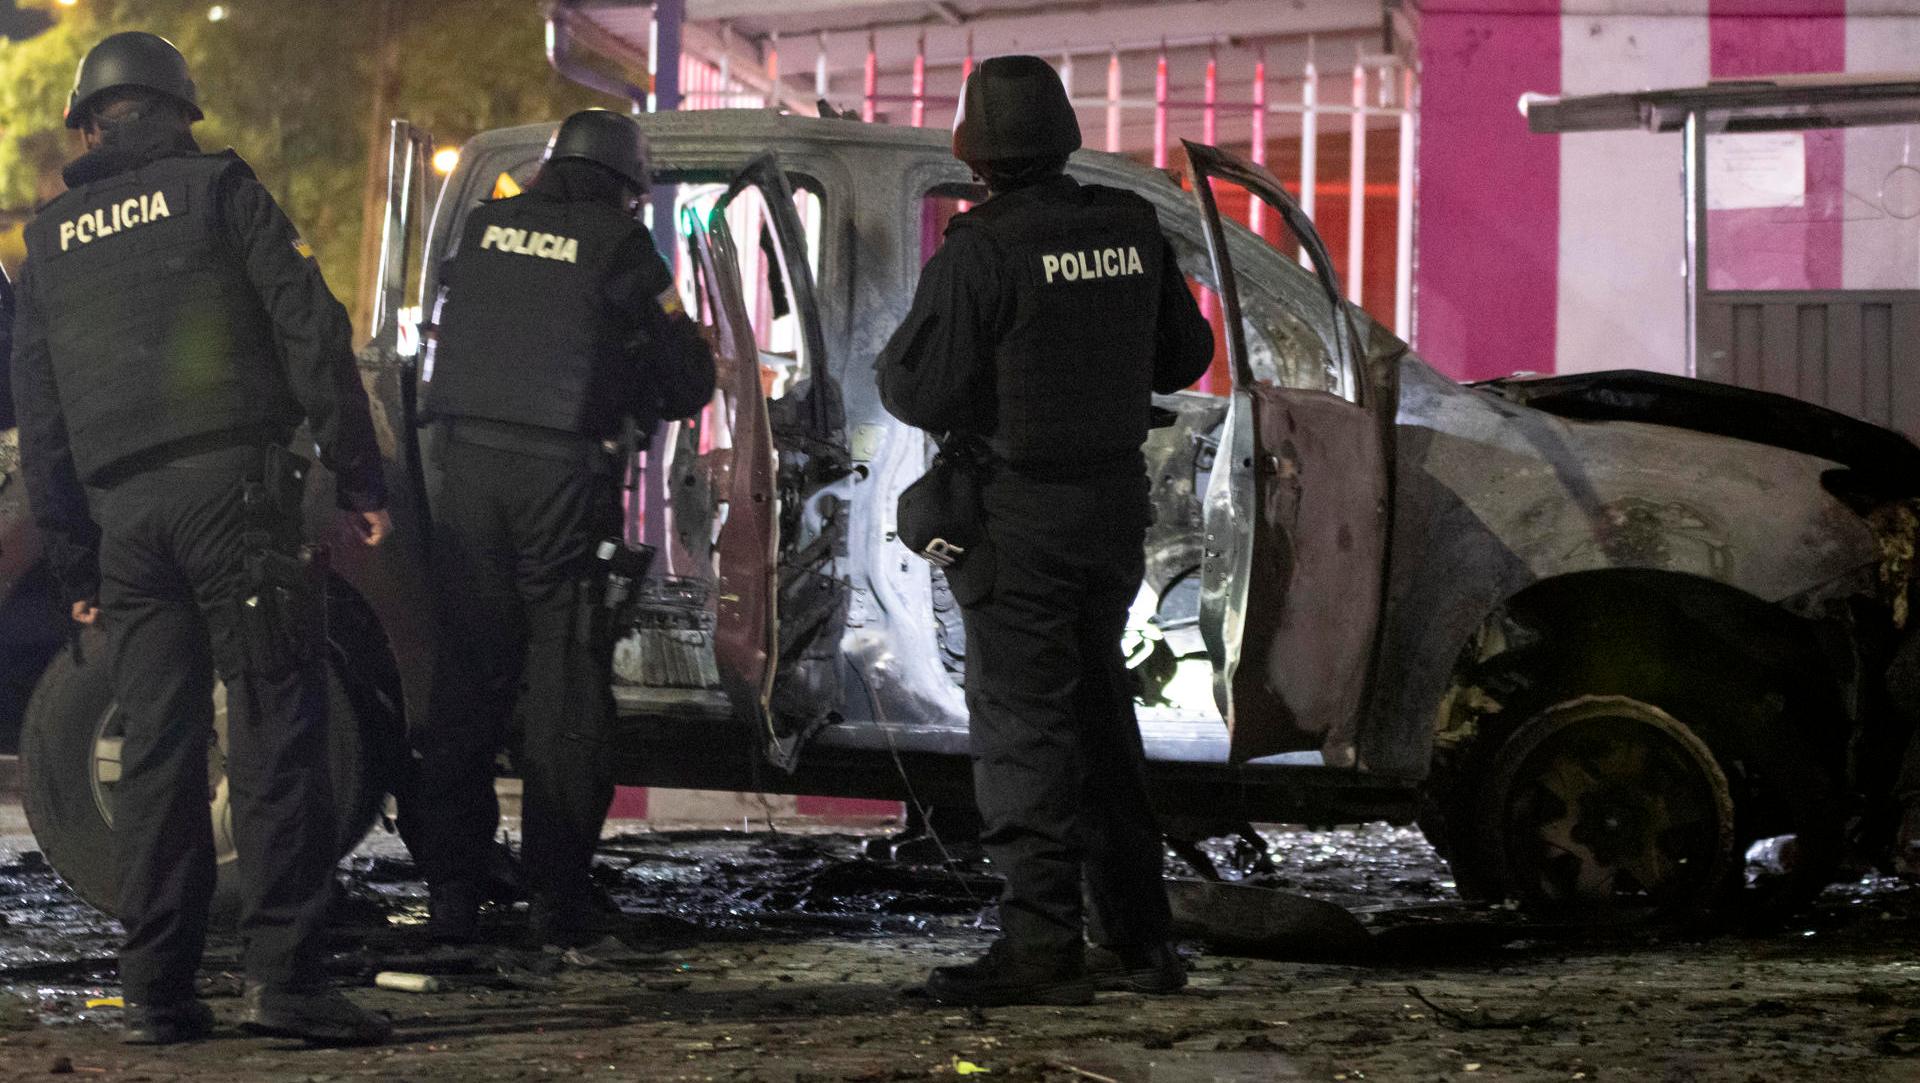 Both the escapes and the riots were accompanied by a wave of violent actions attributed to organized crime gangs that included explosions and car fires.